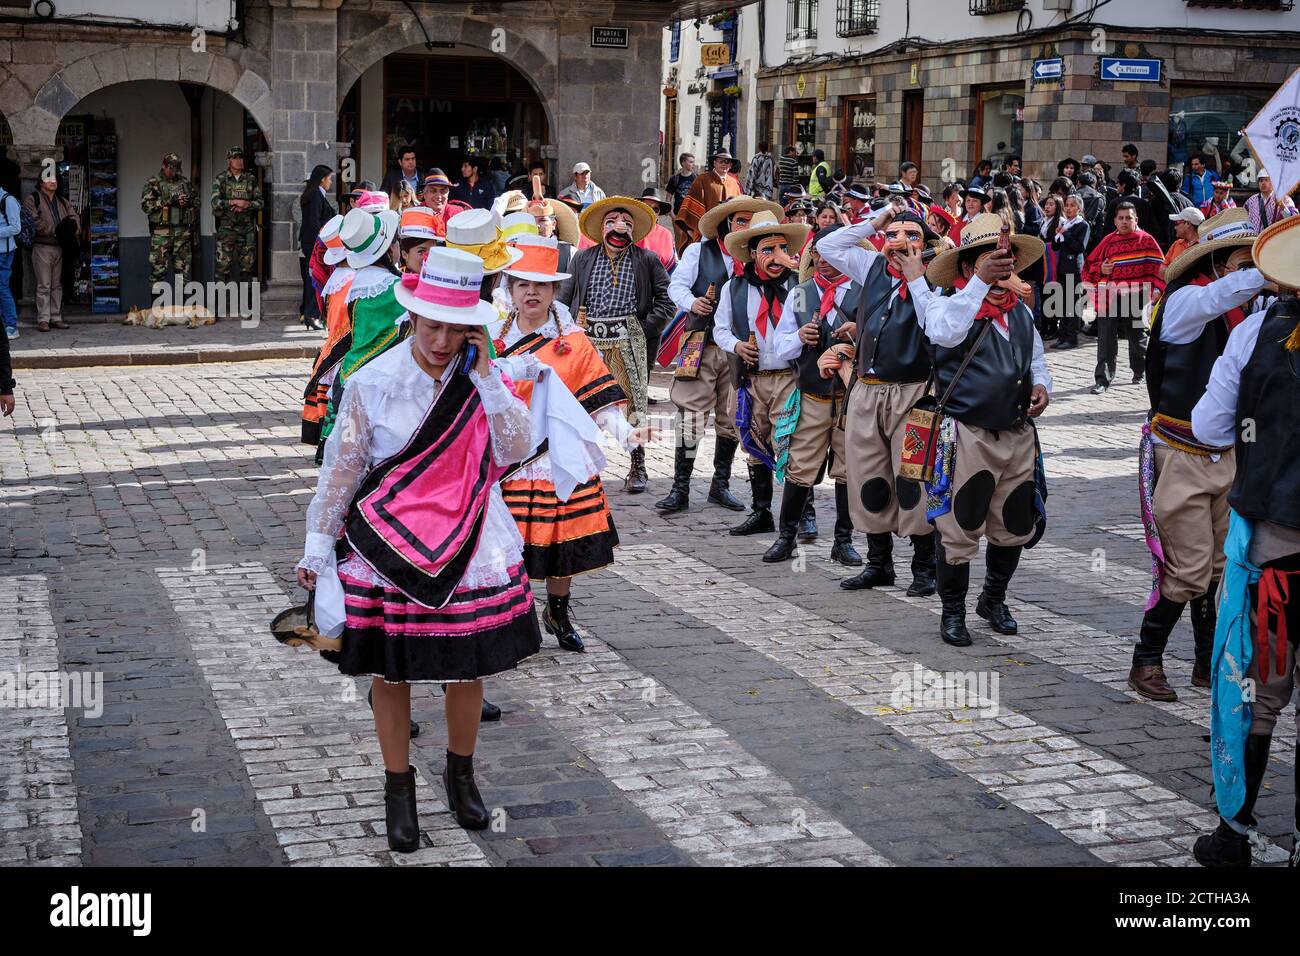 Men and women in costume, waiting to join the parade during the Inti Raymi'rata sun festival over the winter solstice, Cusco, Peru Stock Photo